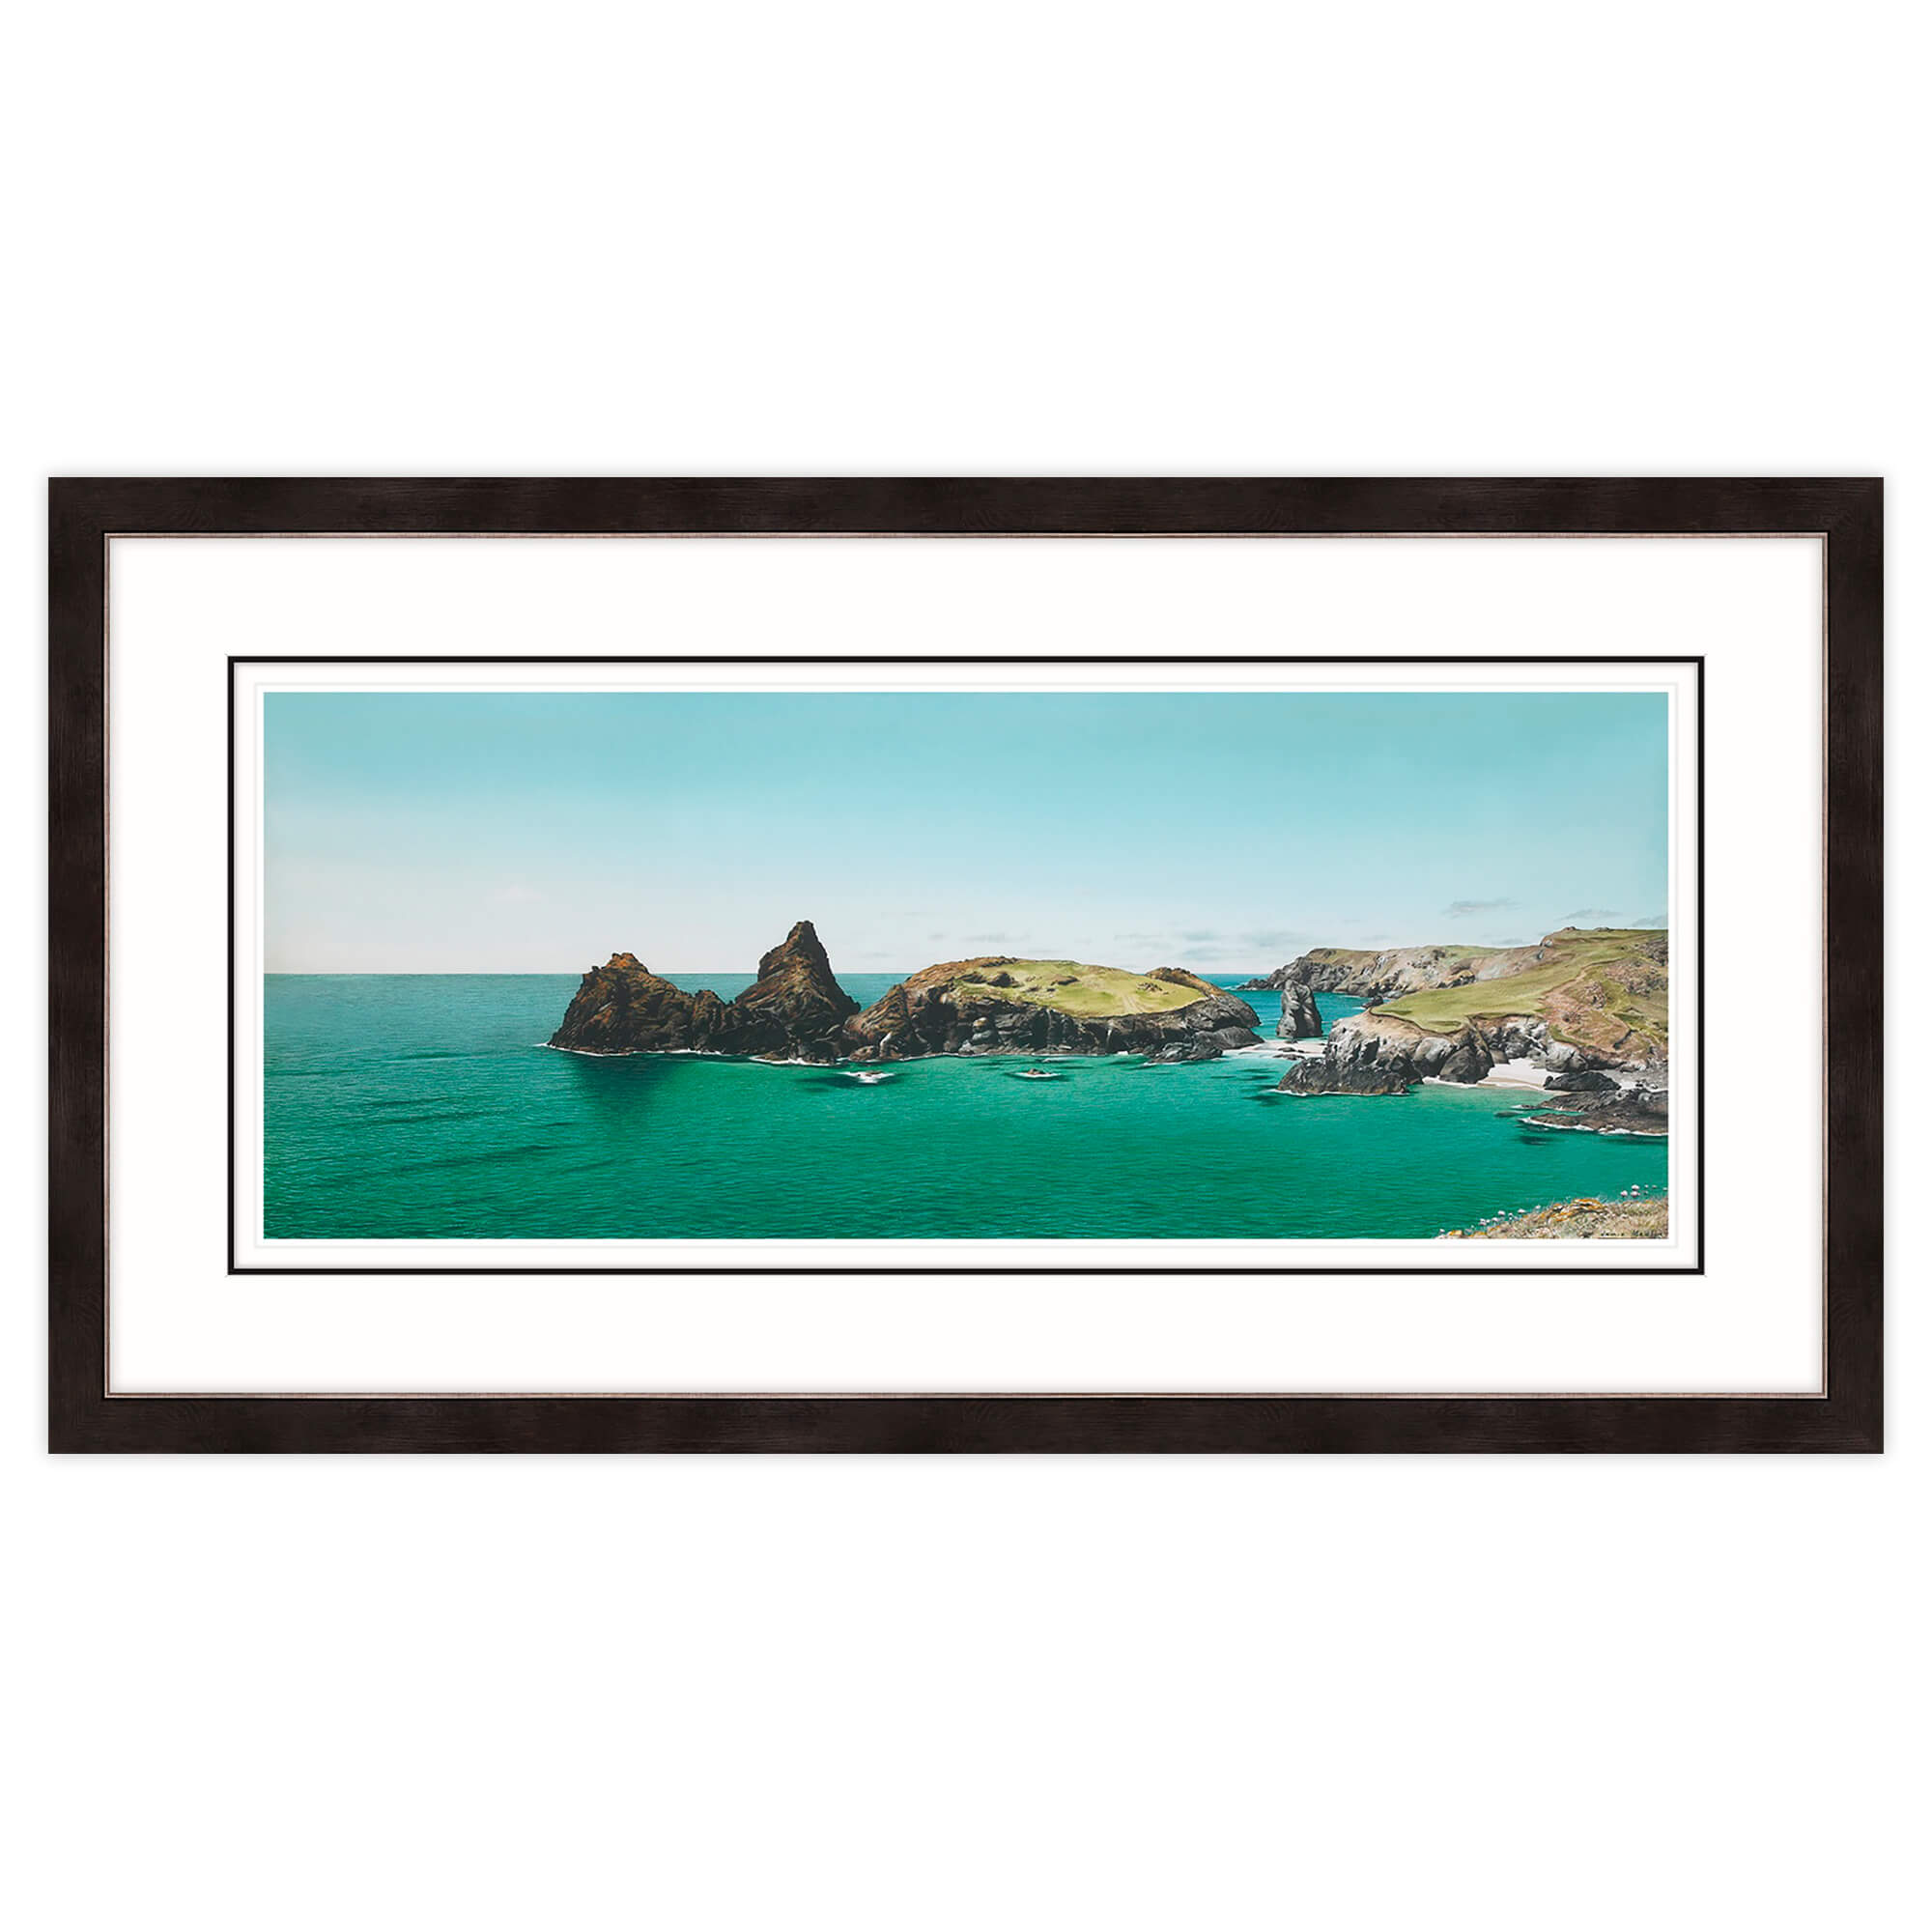 An image of Kynance Cove Framed Print Whistlefish